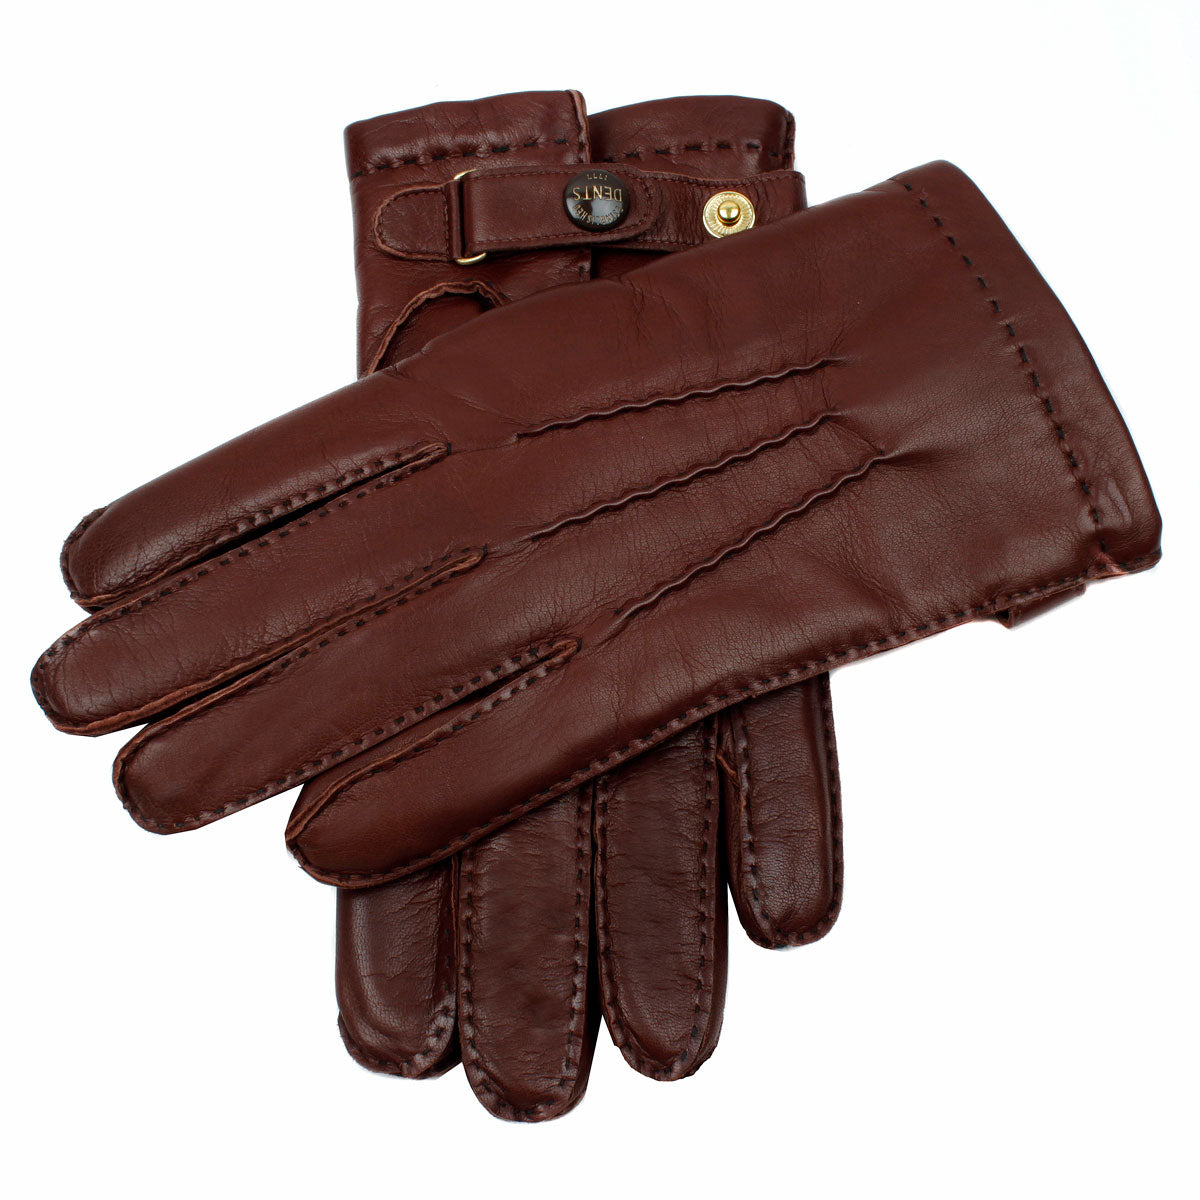 Men's lambskin lined leather gloves in english tan